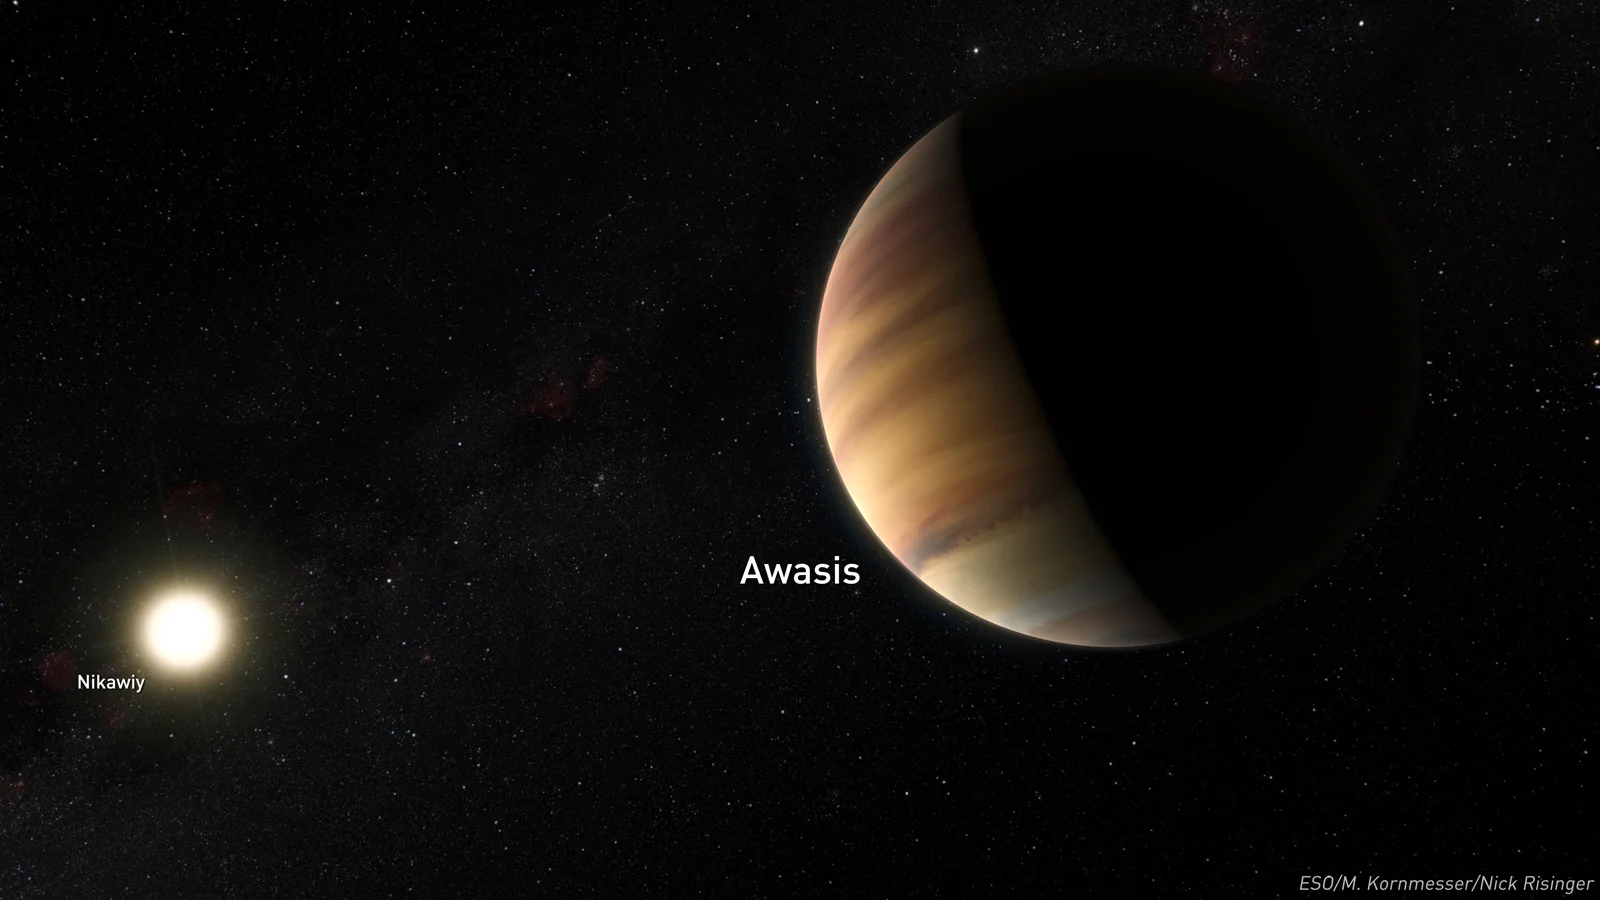 Say hello to Awasis, Canada's very own newly named alien planet